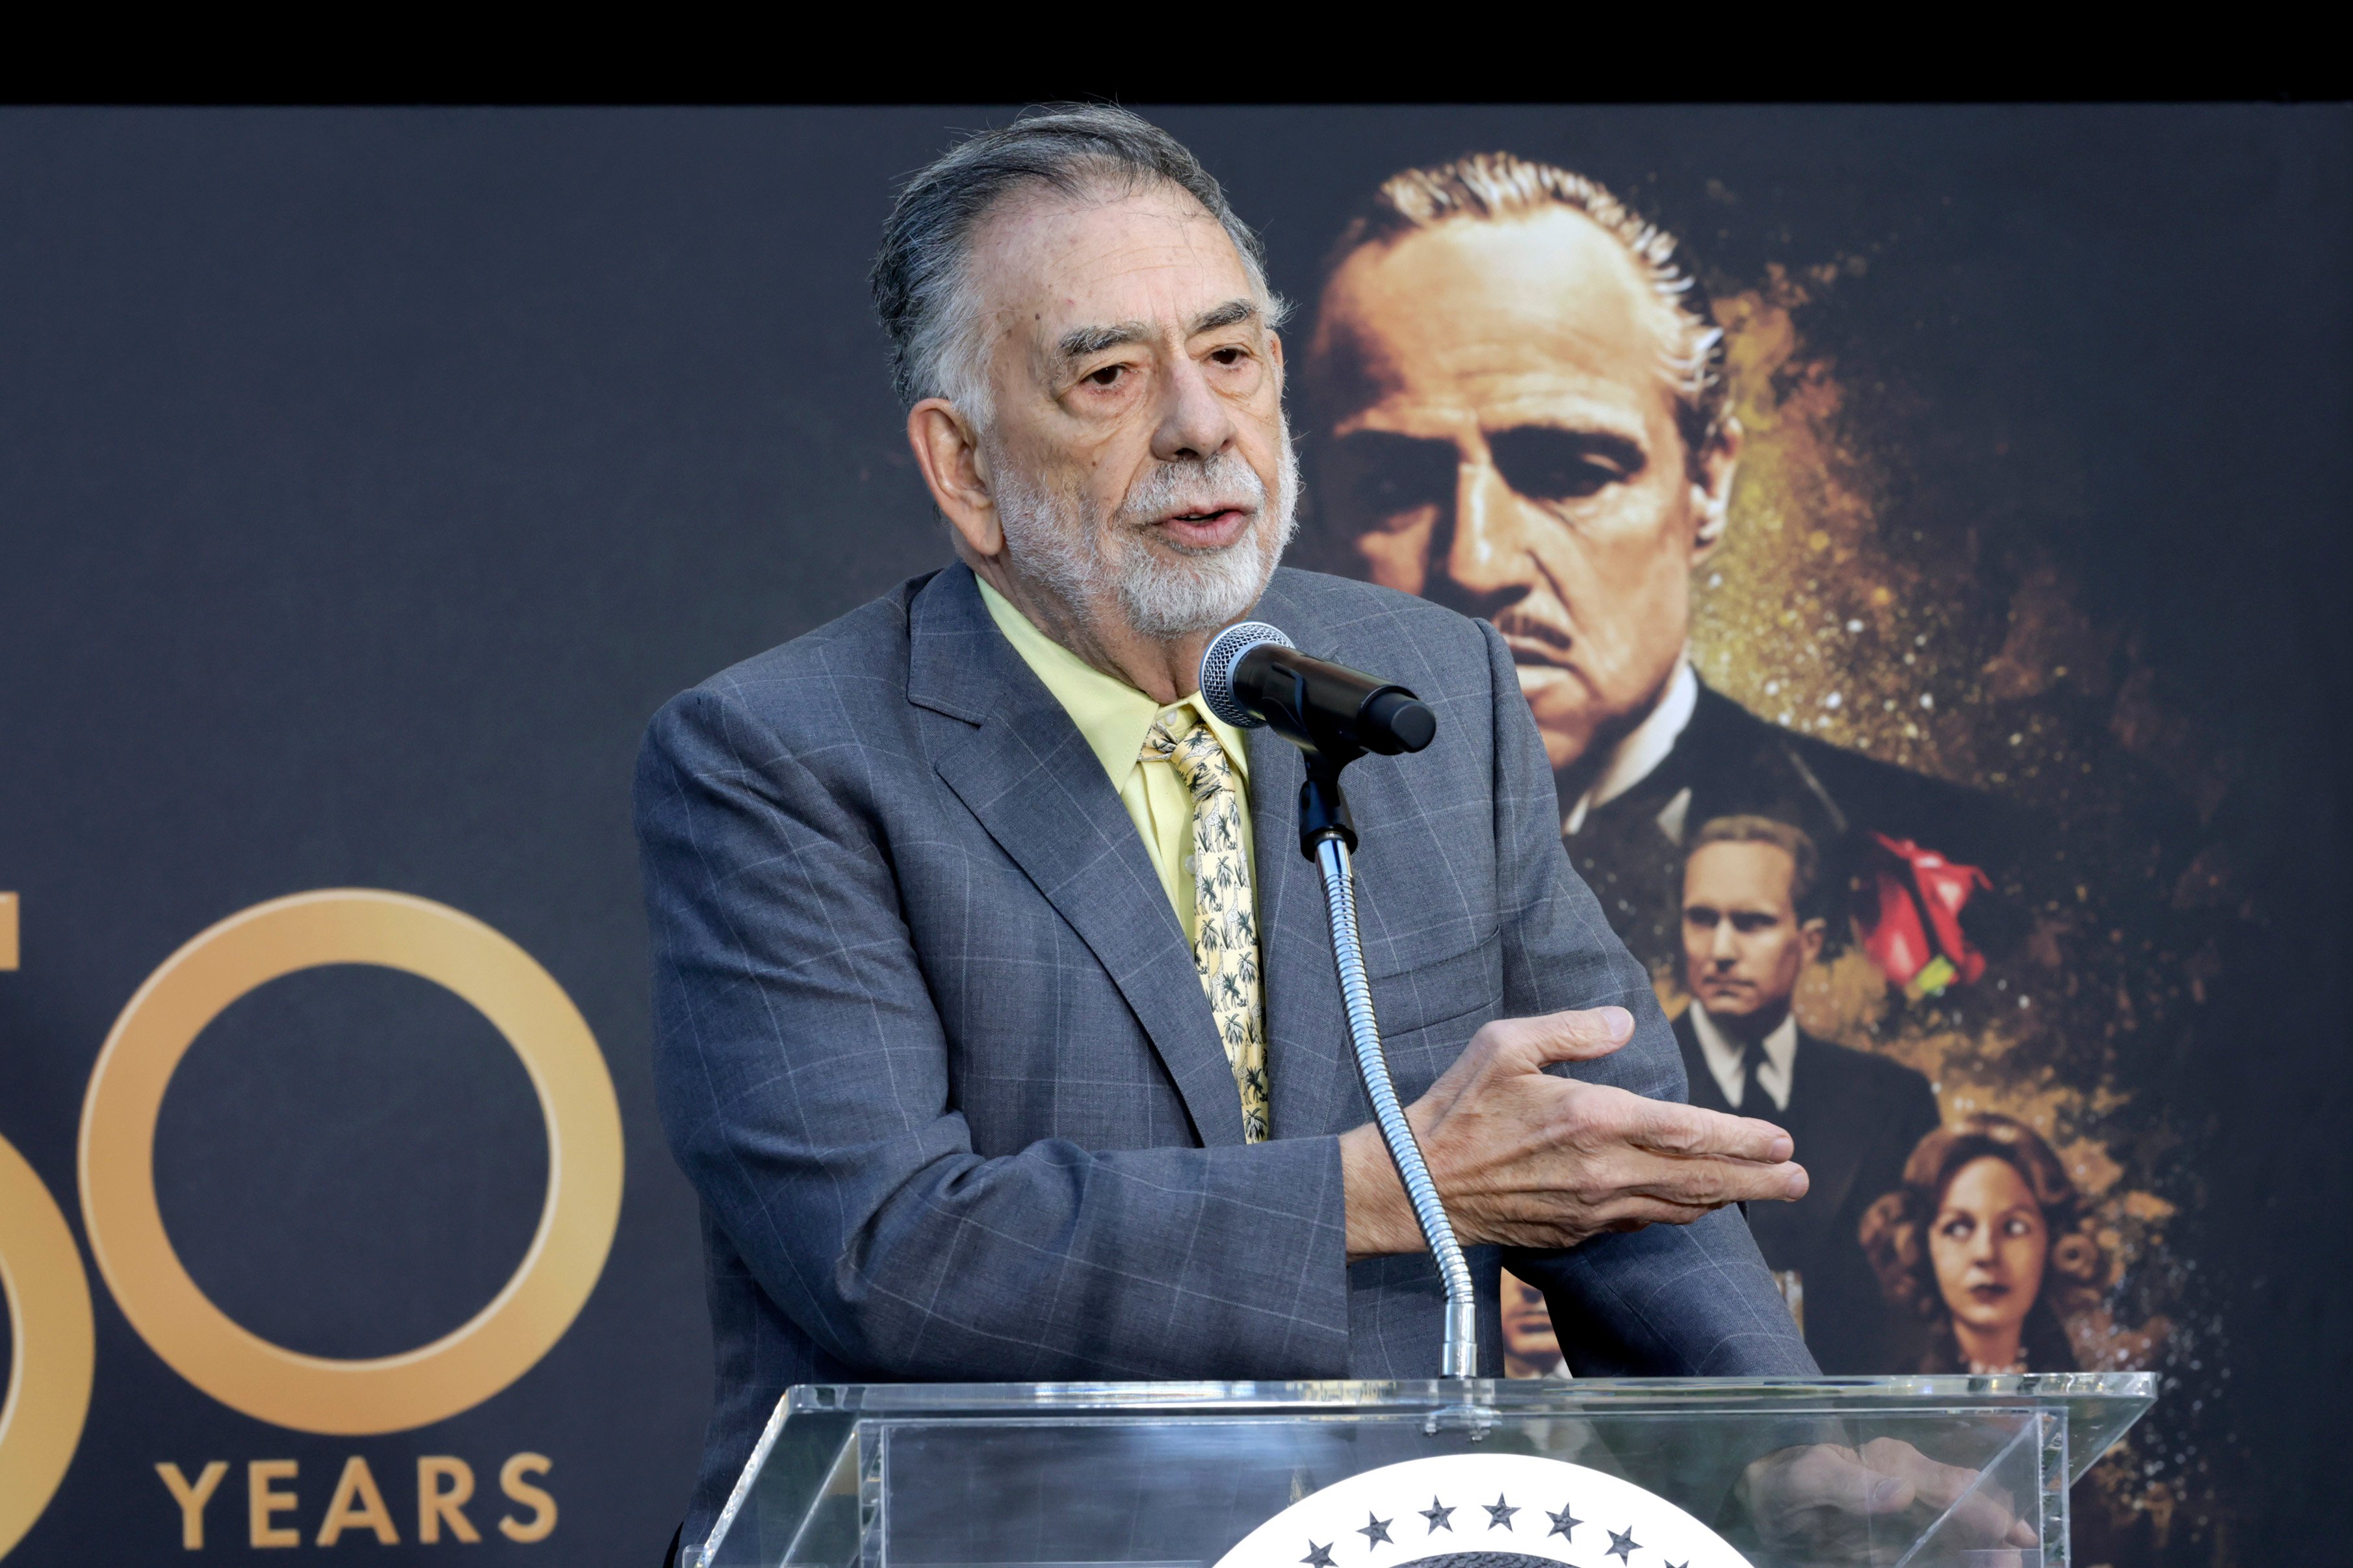 Francis Ford Coppola says the horse head use in The Godfather was real.